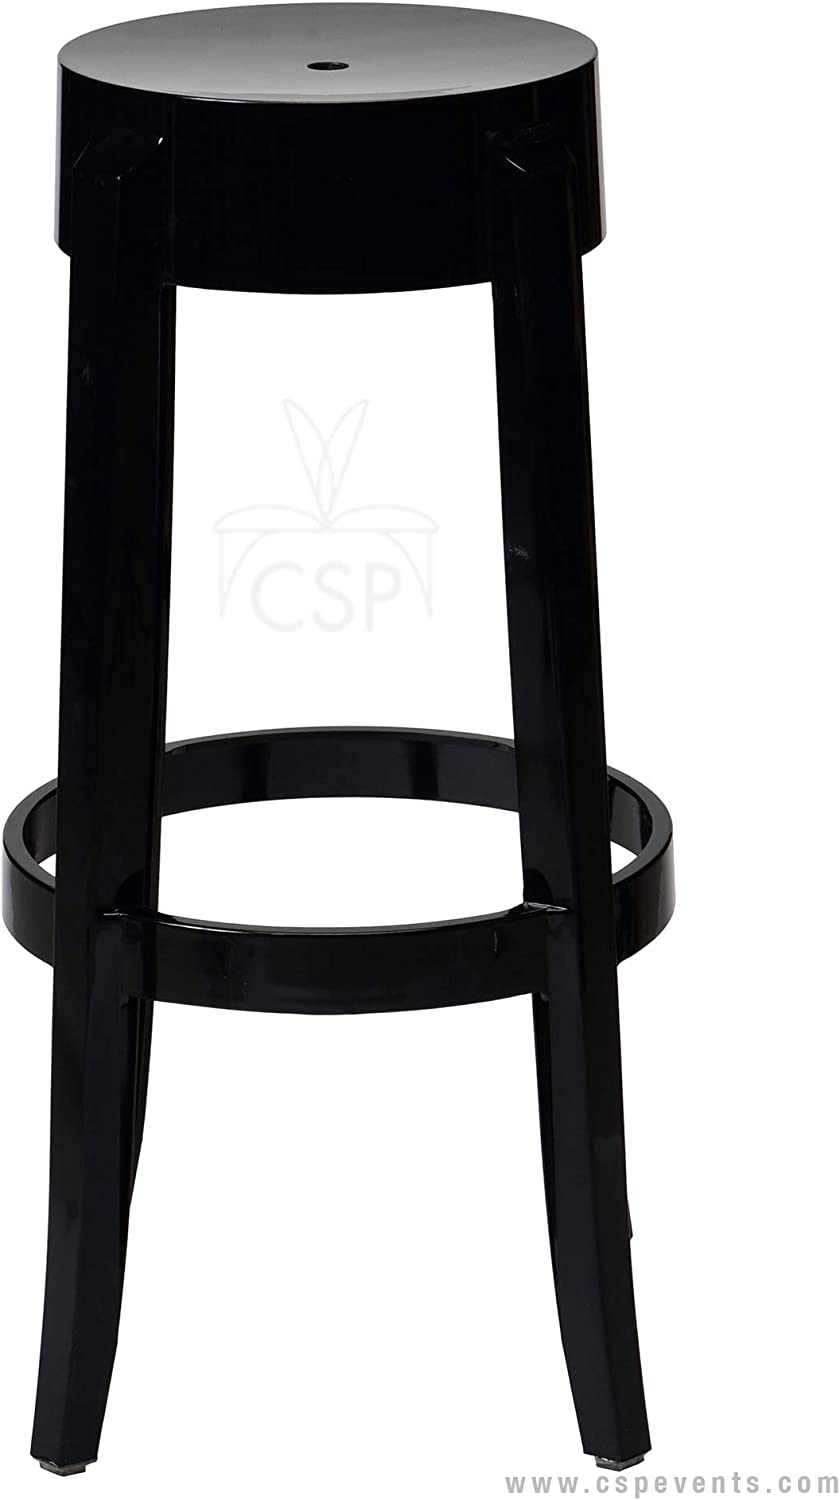 Commercial Seating Products Black Kage Backless Stool Chairs